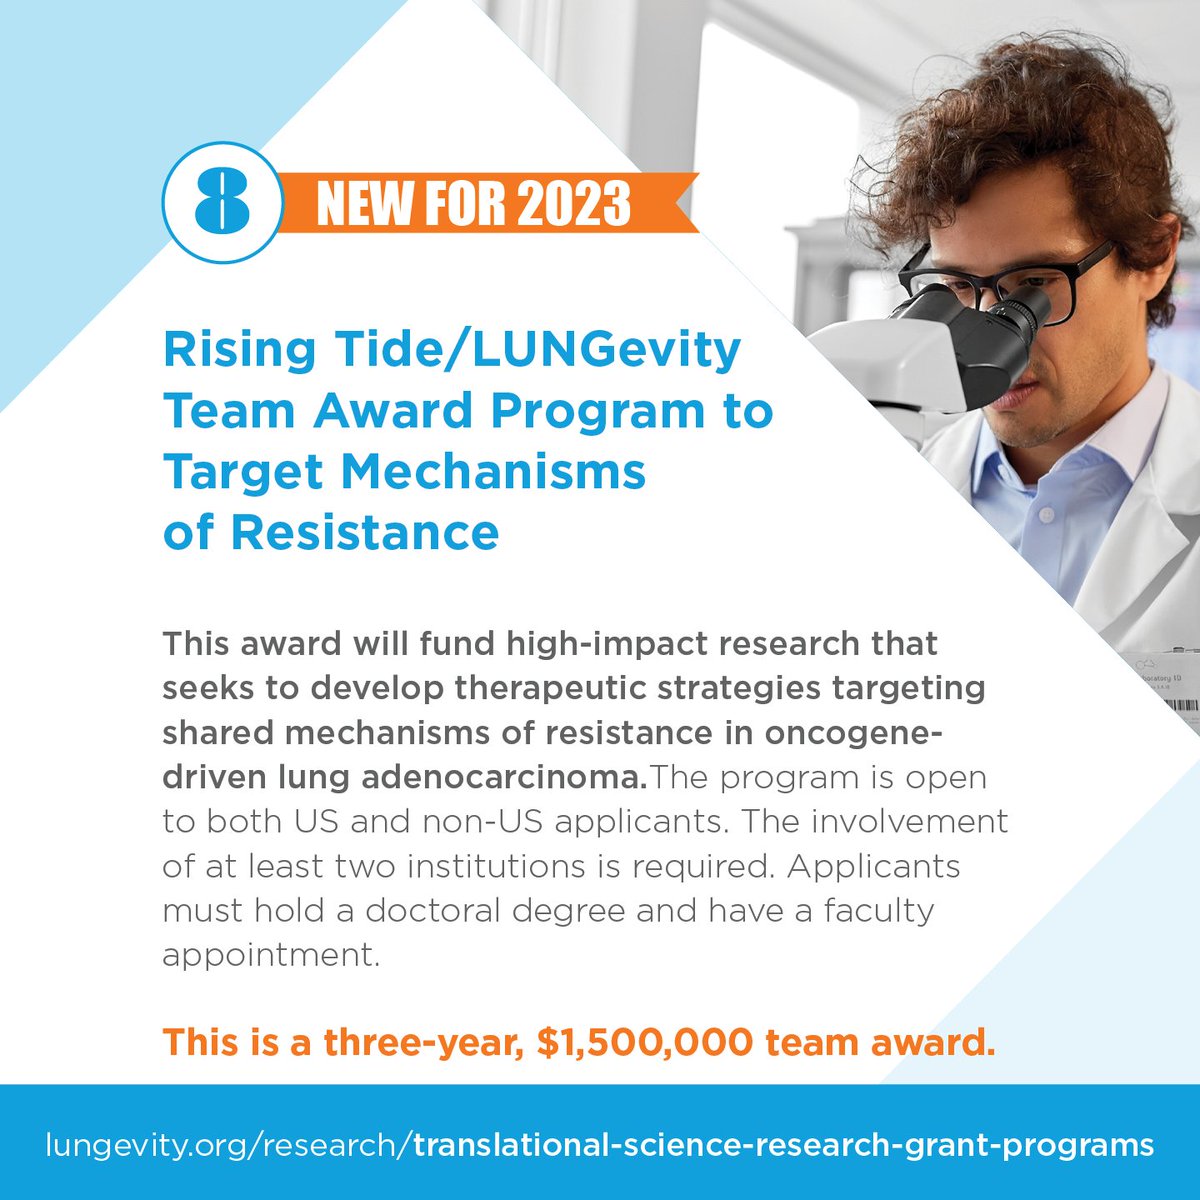 New this year are the @EGFRResisters/LUNGevity Research Award Program, @ASTRO_org-LUNGevity Residents/Fellows in Radiation Oncology Seed Grant, & Rising Tide Group/LUNGevity Team Award Program. For information visit bit.ly/2X7P3na #LUNGevityResearch #RFADAY (3/3)